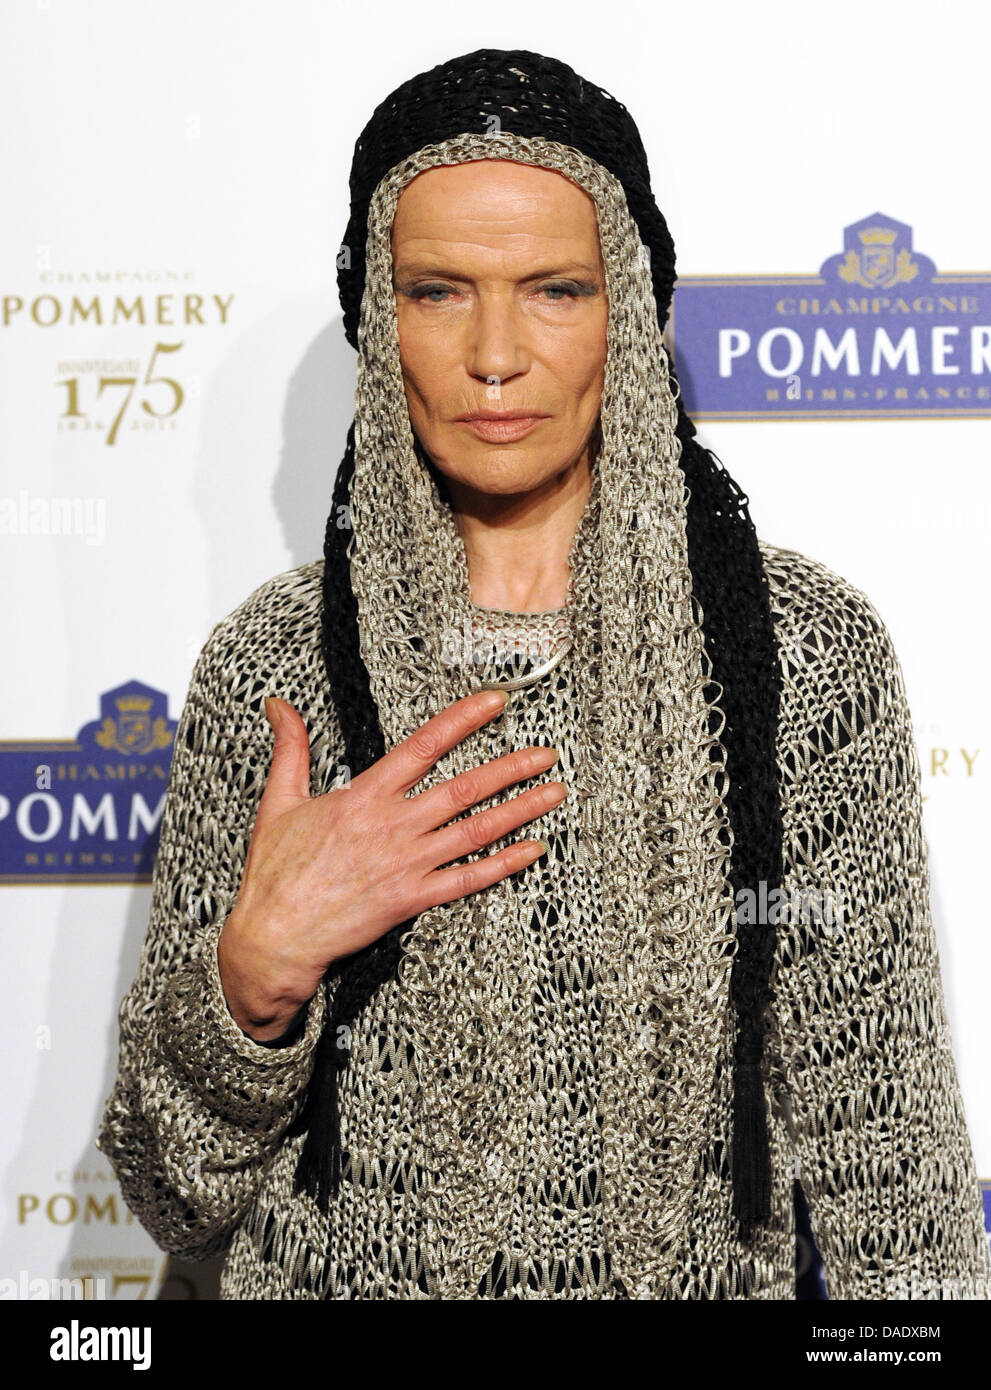 Countess Vera von Lehndorff attends the 175th anniversary of the champagne brand Pommery at the French embassy in Berlin, Germany, 03 November 2011. Photo: Jens Kalaene Stock Photo